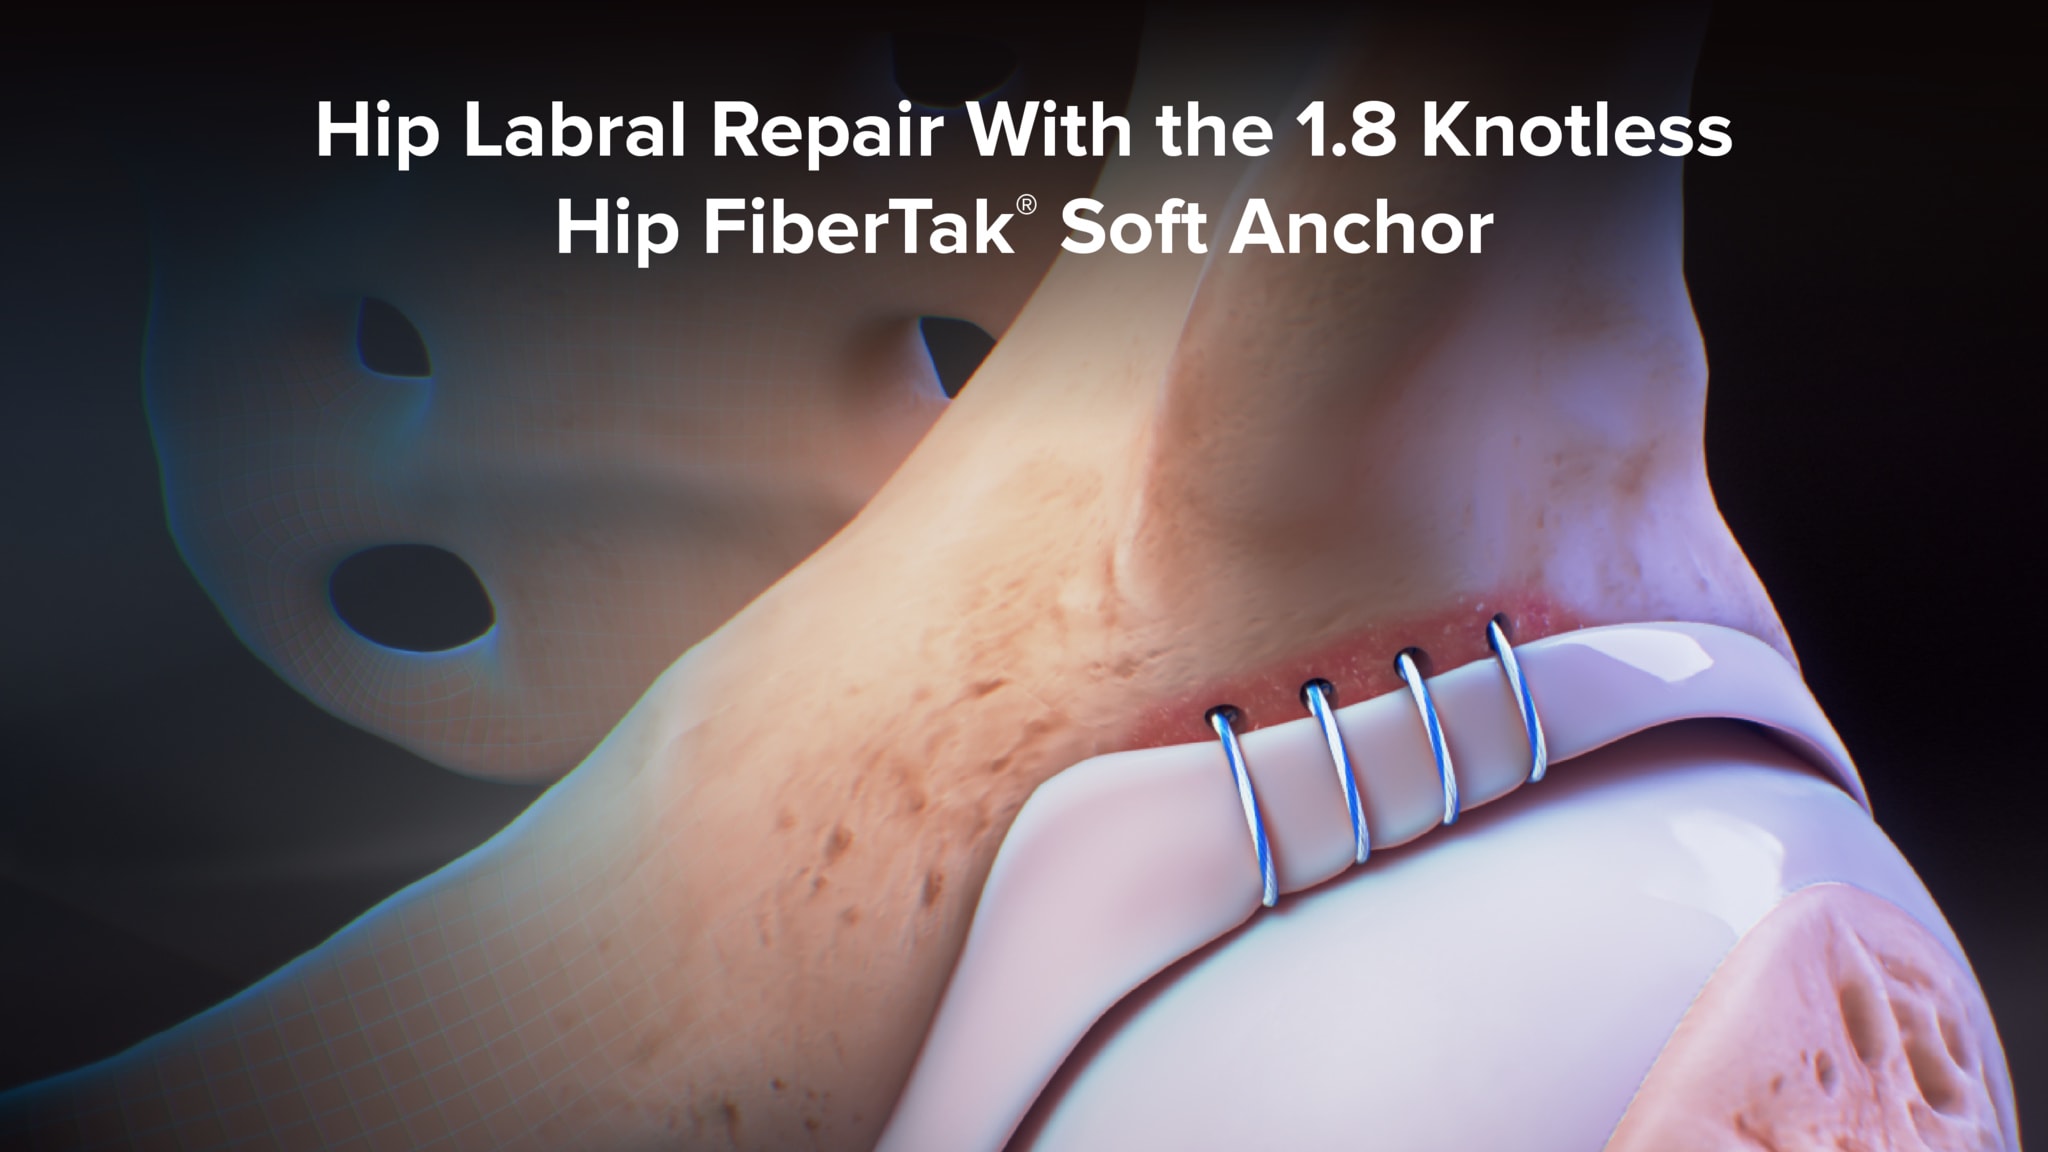 Hip Labral Repair Using the Knotless 1.8 Hip FiberTak® Soft Anchor and an Inversion Stitch 